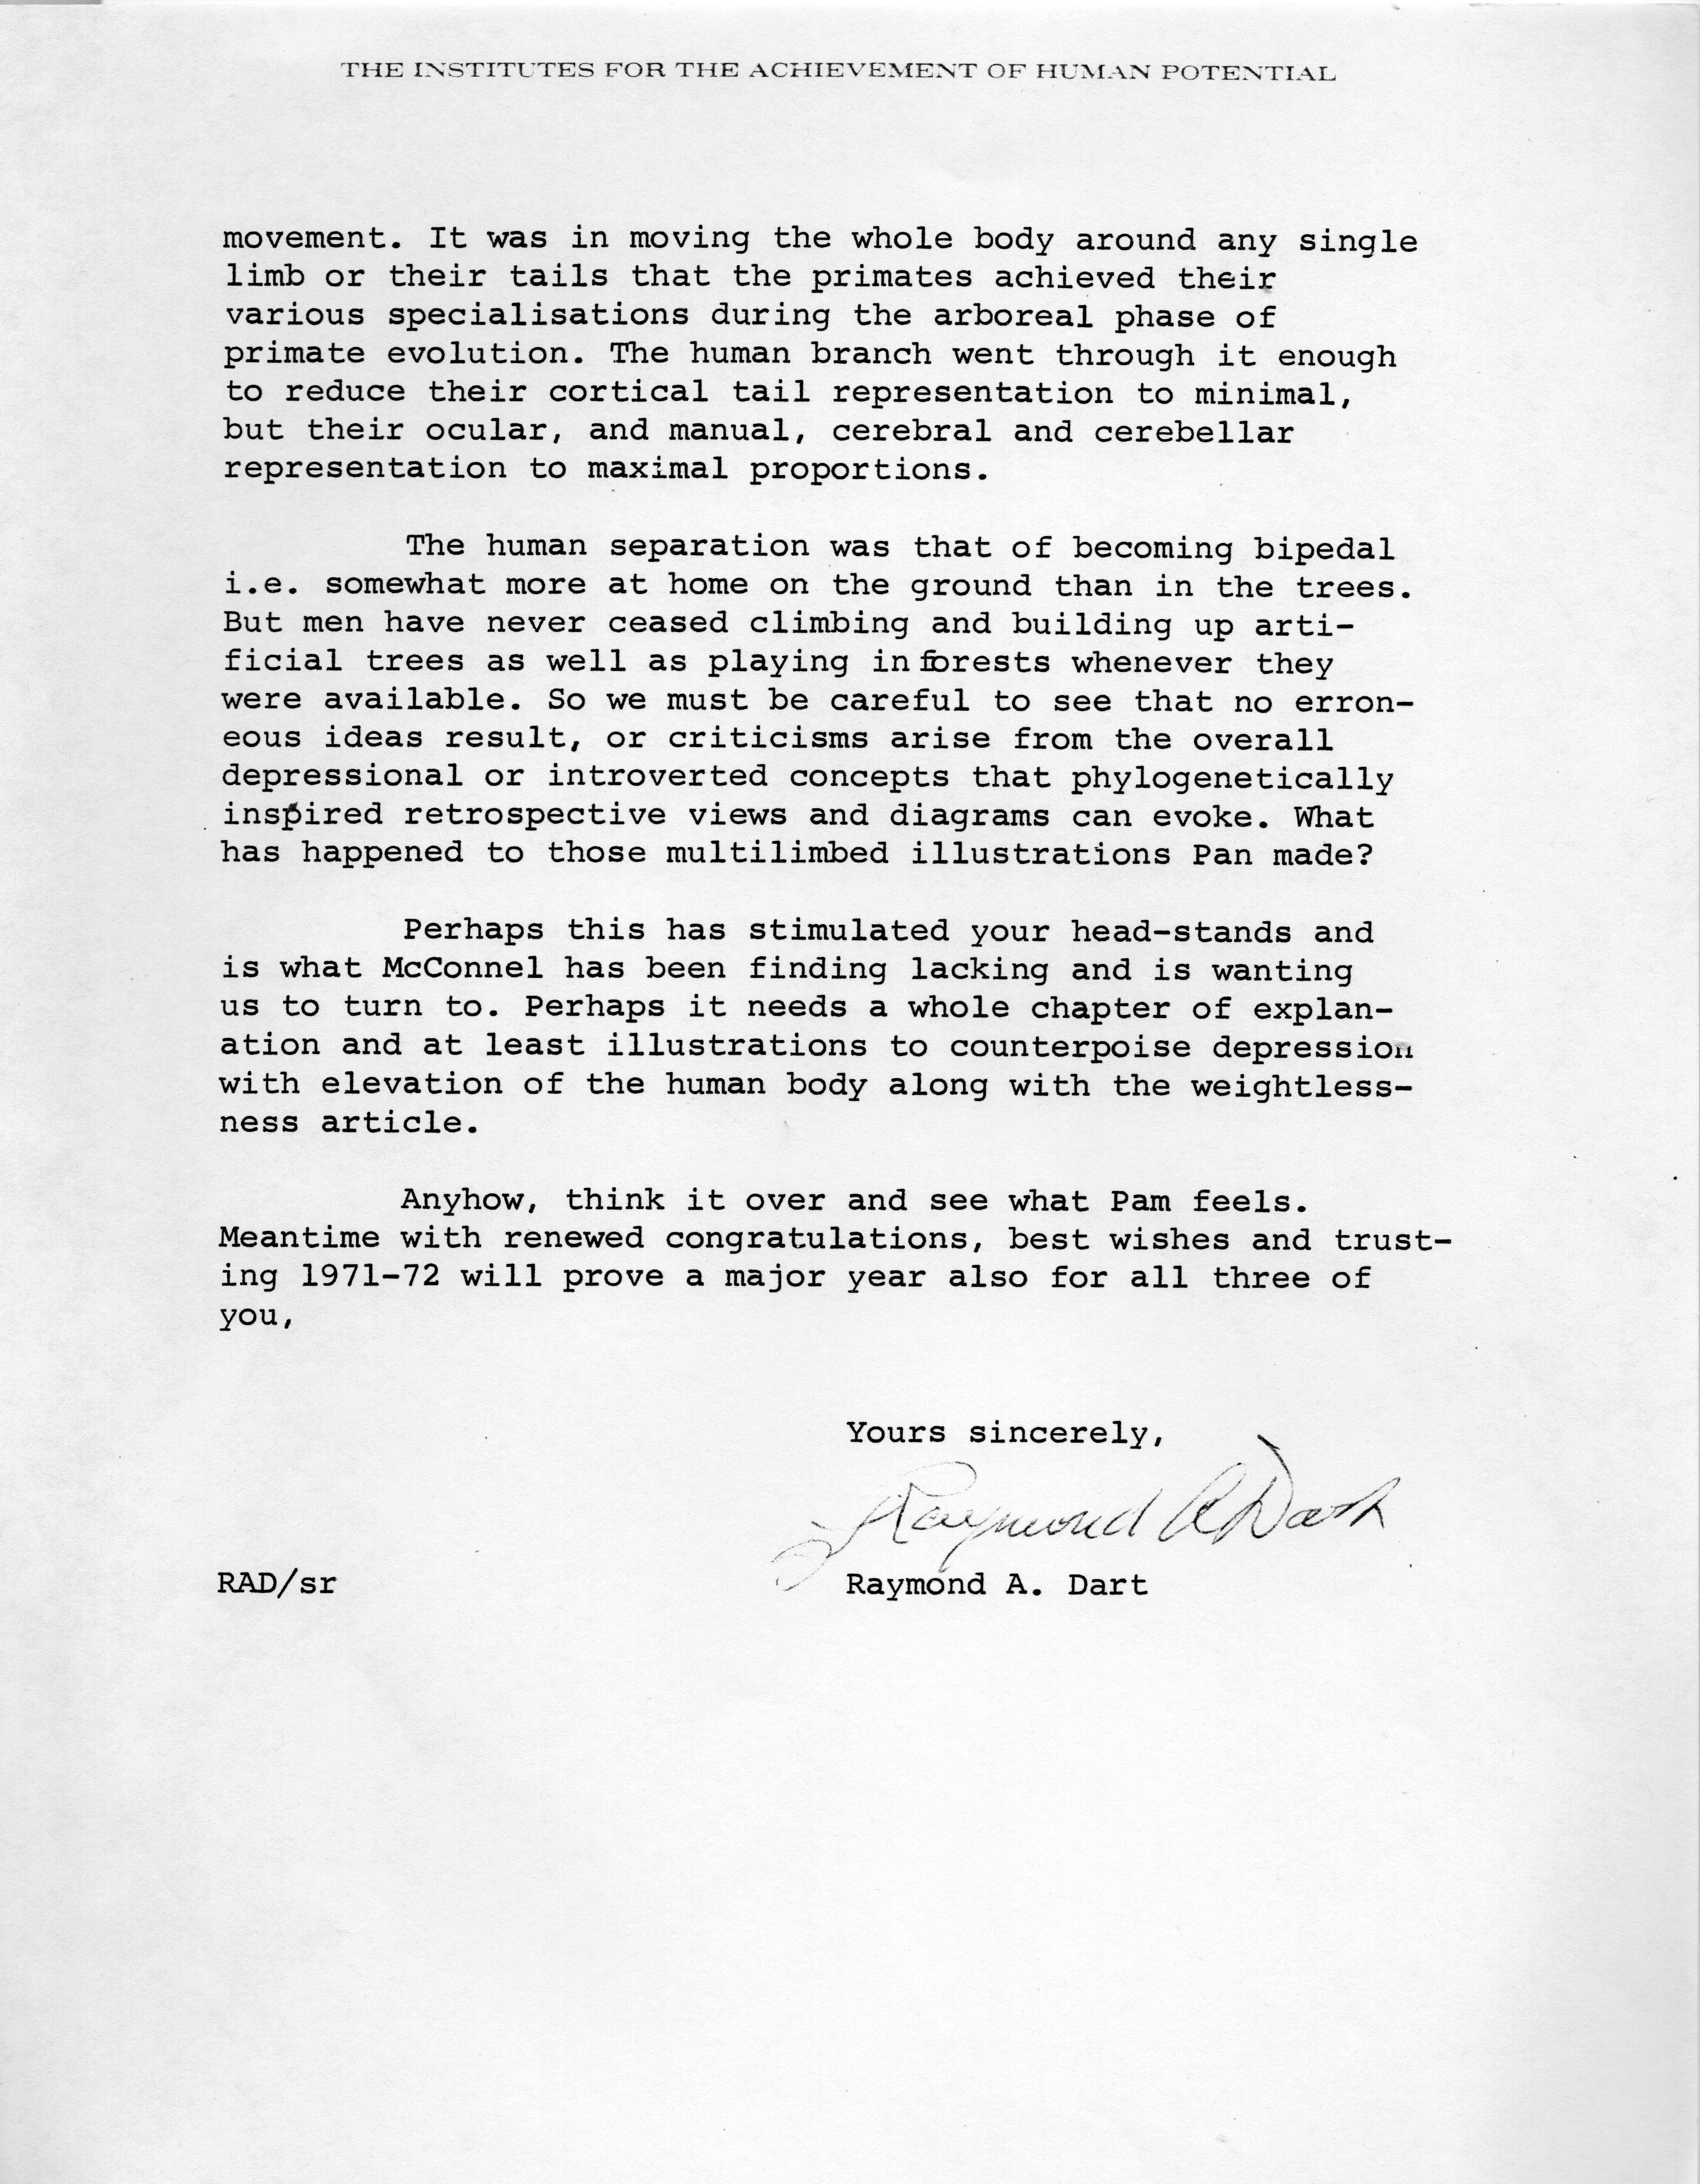 Page 2 of Dart letter to Murray May 27, 1971